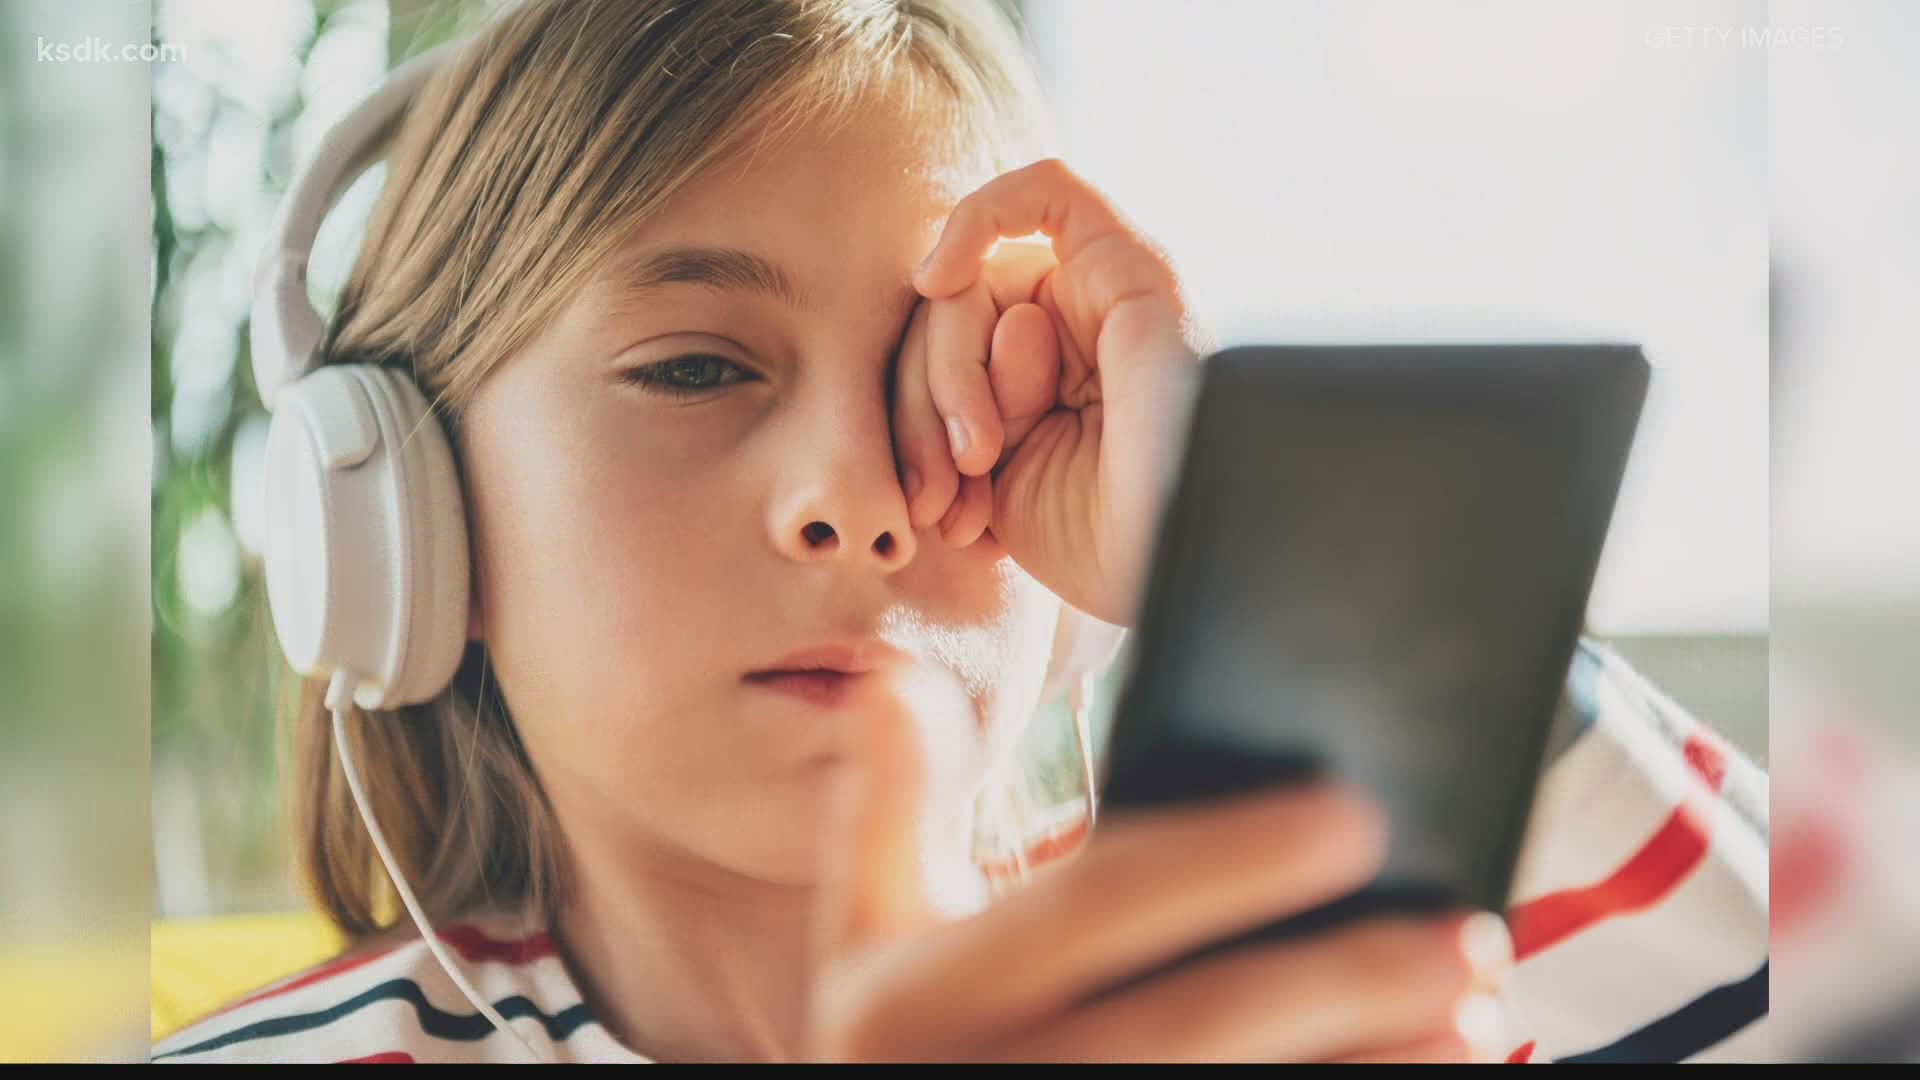 These days we’ve all become zoomies: virtual zombies on our screens. This can be concerning for kids, who are coming up on a year of at-home leaning.